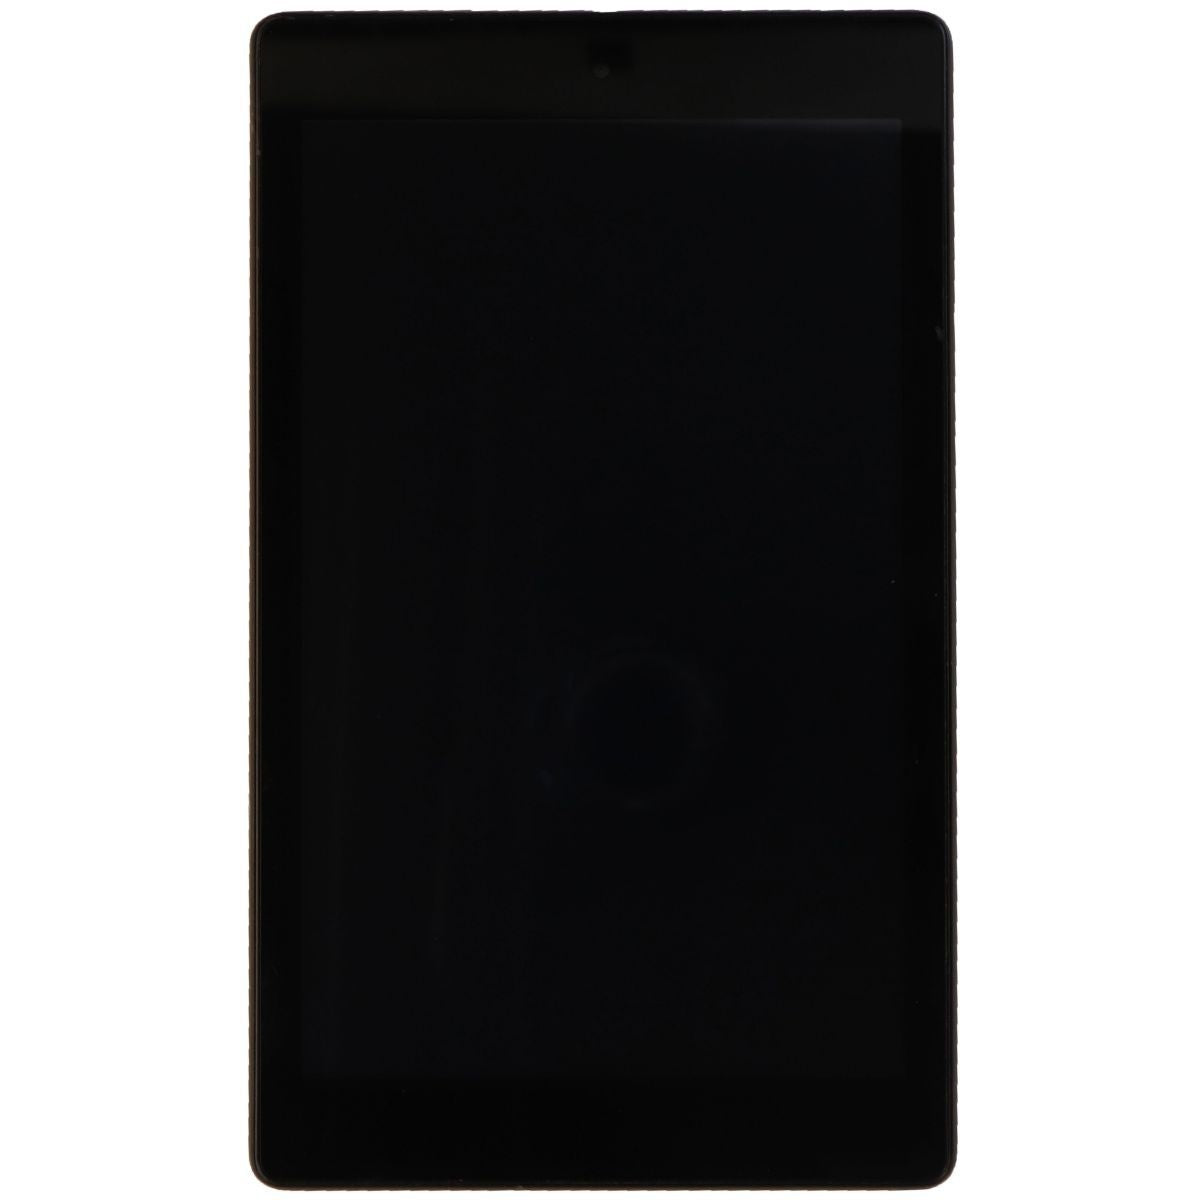 Amazon Kindle Fire HD 8 Tablet (6th Generation) 16GB - Black - PR53DC iPads, Tablets & eBook Readers Amazon    - Simple Cell Bulk Wholesale Pricing - USA Seller